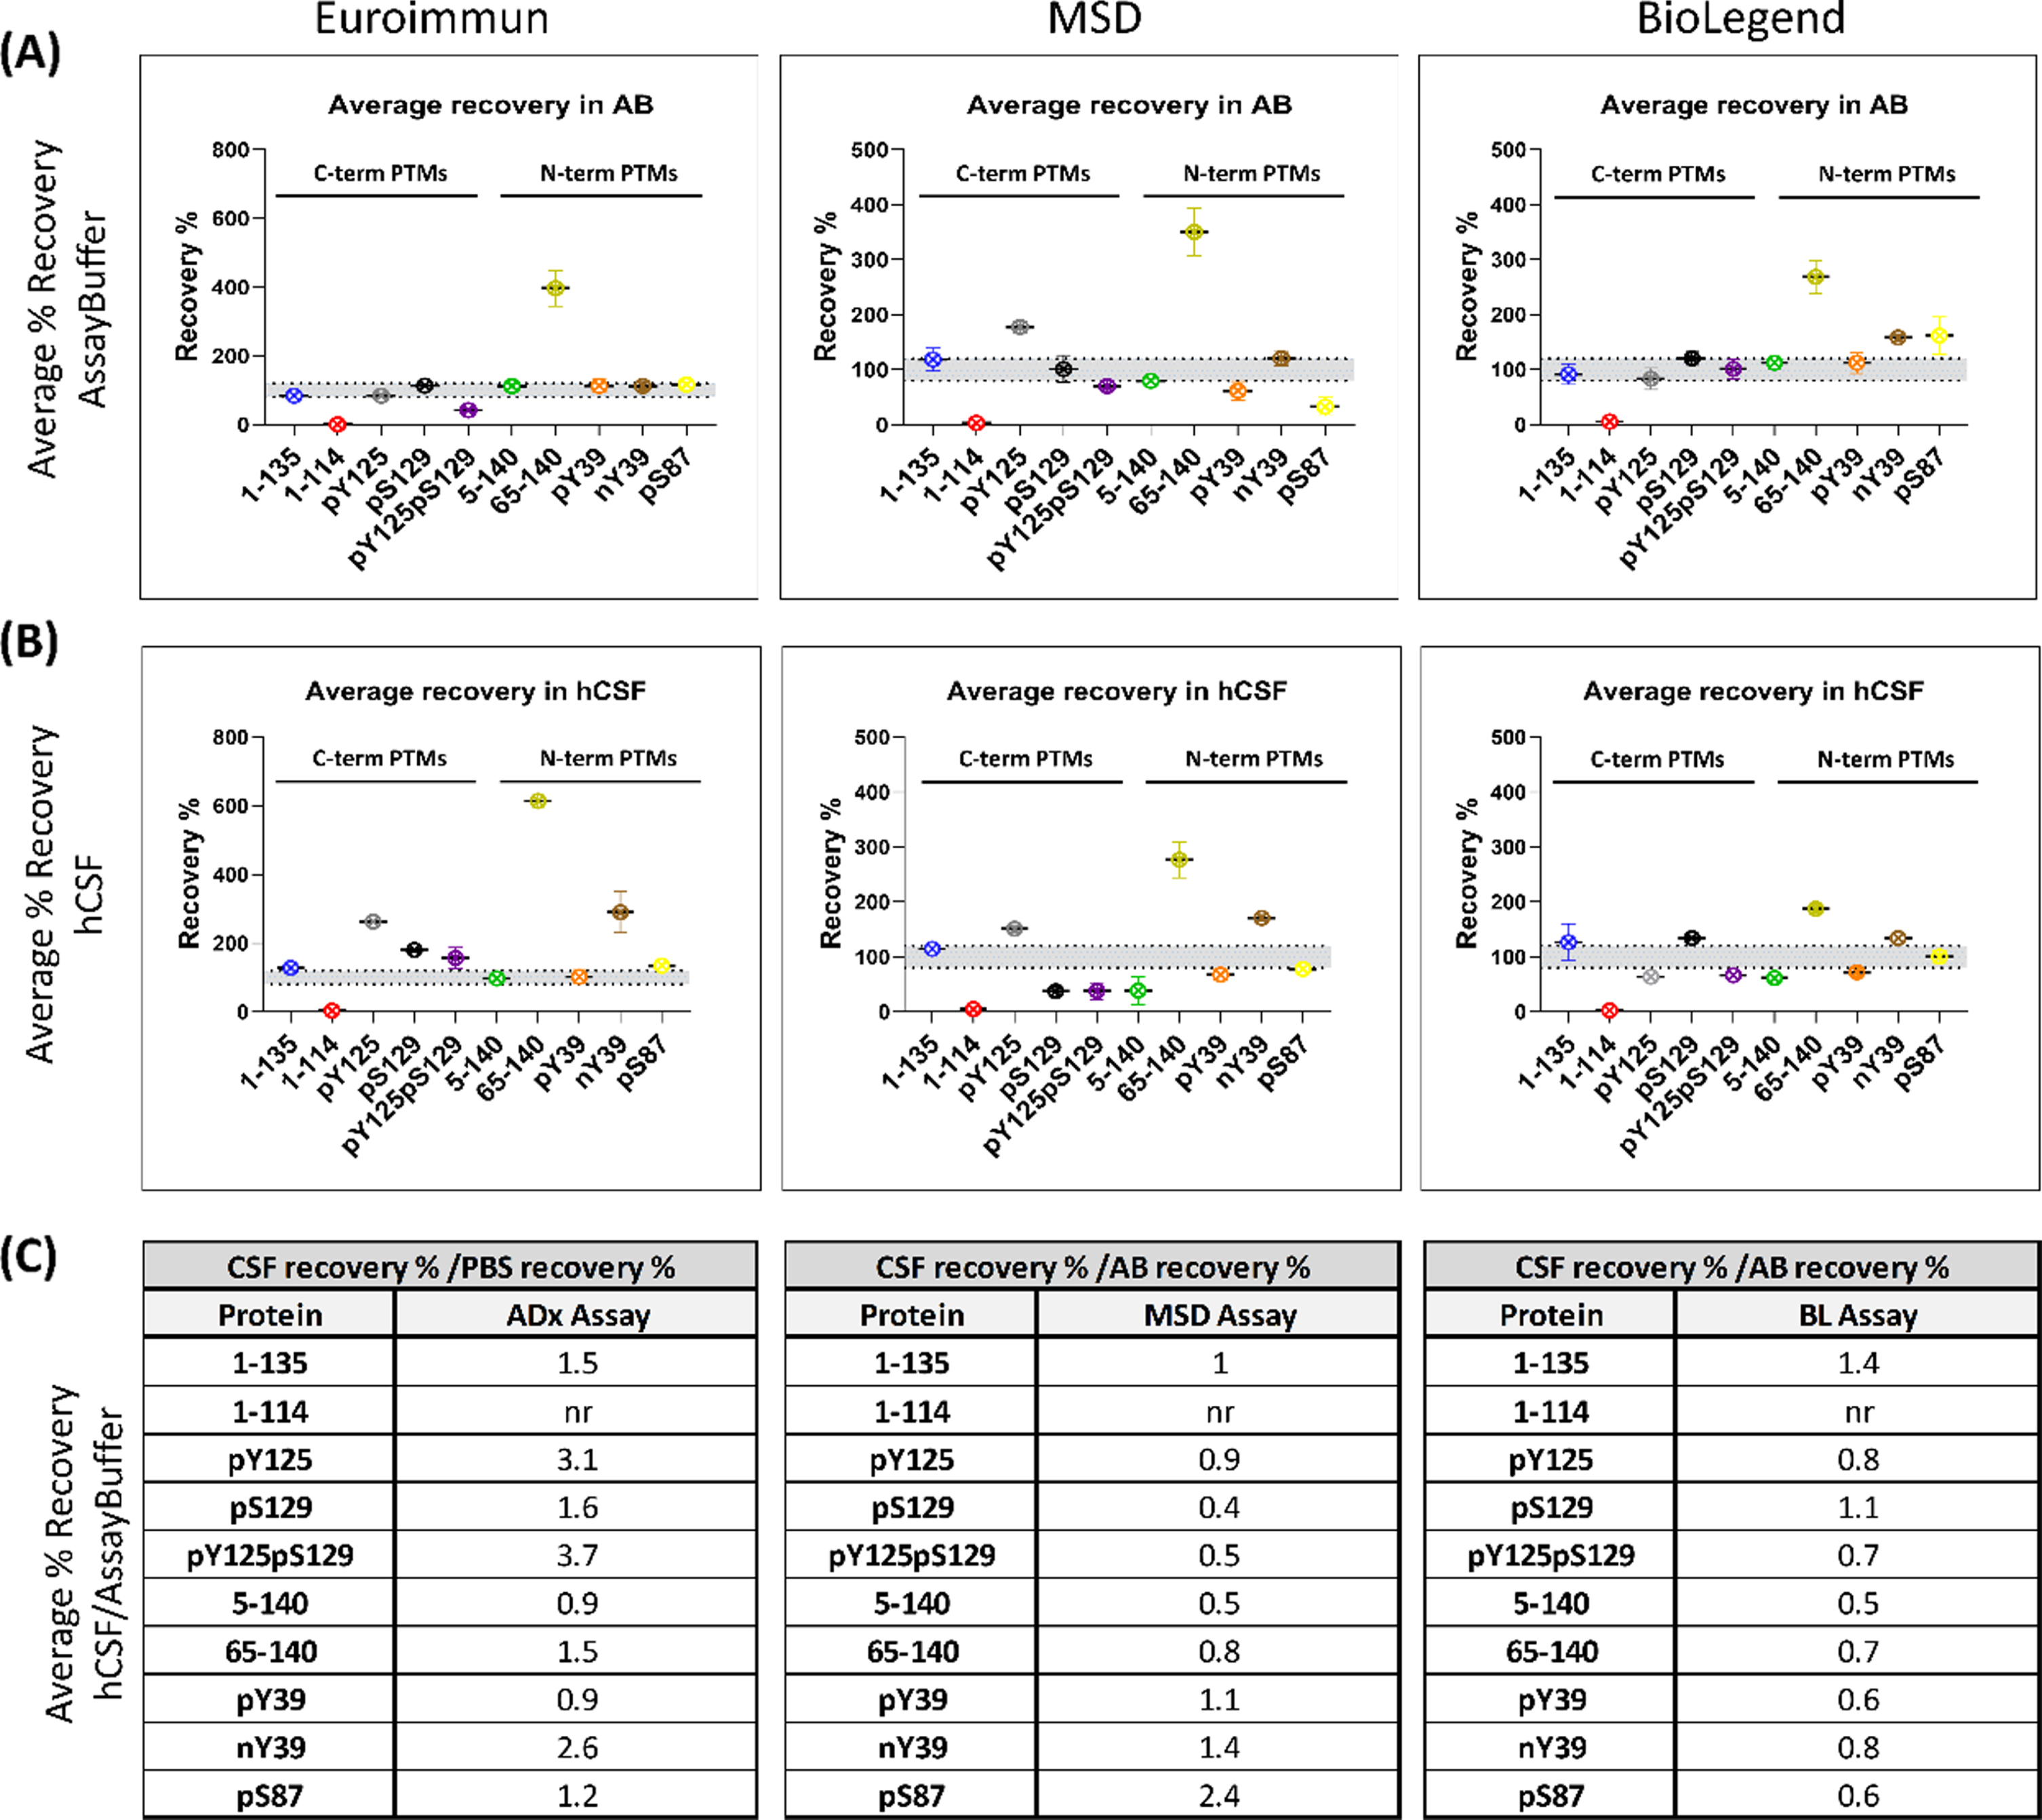 Most PTM αSYN proteins are not fully recovered from human CSF. Recovery is assessed as the percentage of the back-calculated values of the spiked samples subtracted from the unspiked sample with respect to the nominal spiked protein amount. The high, medium, and low recovery percentages are averaged. The data obtained from each assay are detailed separately. (A) Average percentage recovery of spiked PTM αSYN proteins in assay buffer and (B) a commercial pool of human CSF. (C) Tables listing the ratios of the average percentage recovery of hCSF to the percentage recovery of assay buffer. Ratio = 1 indicates no difference in recovery from the two matrices. Ratio > 1 <indicates a matrix effect.